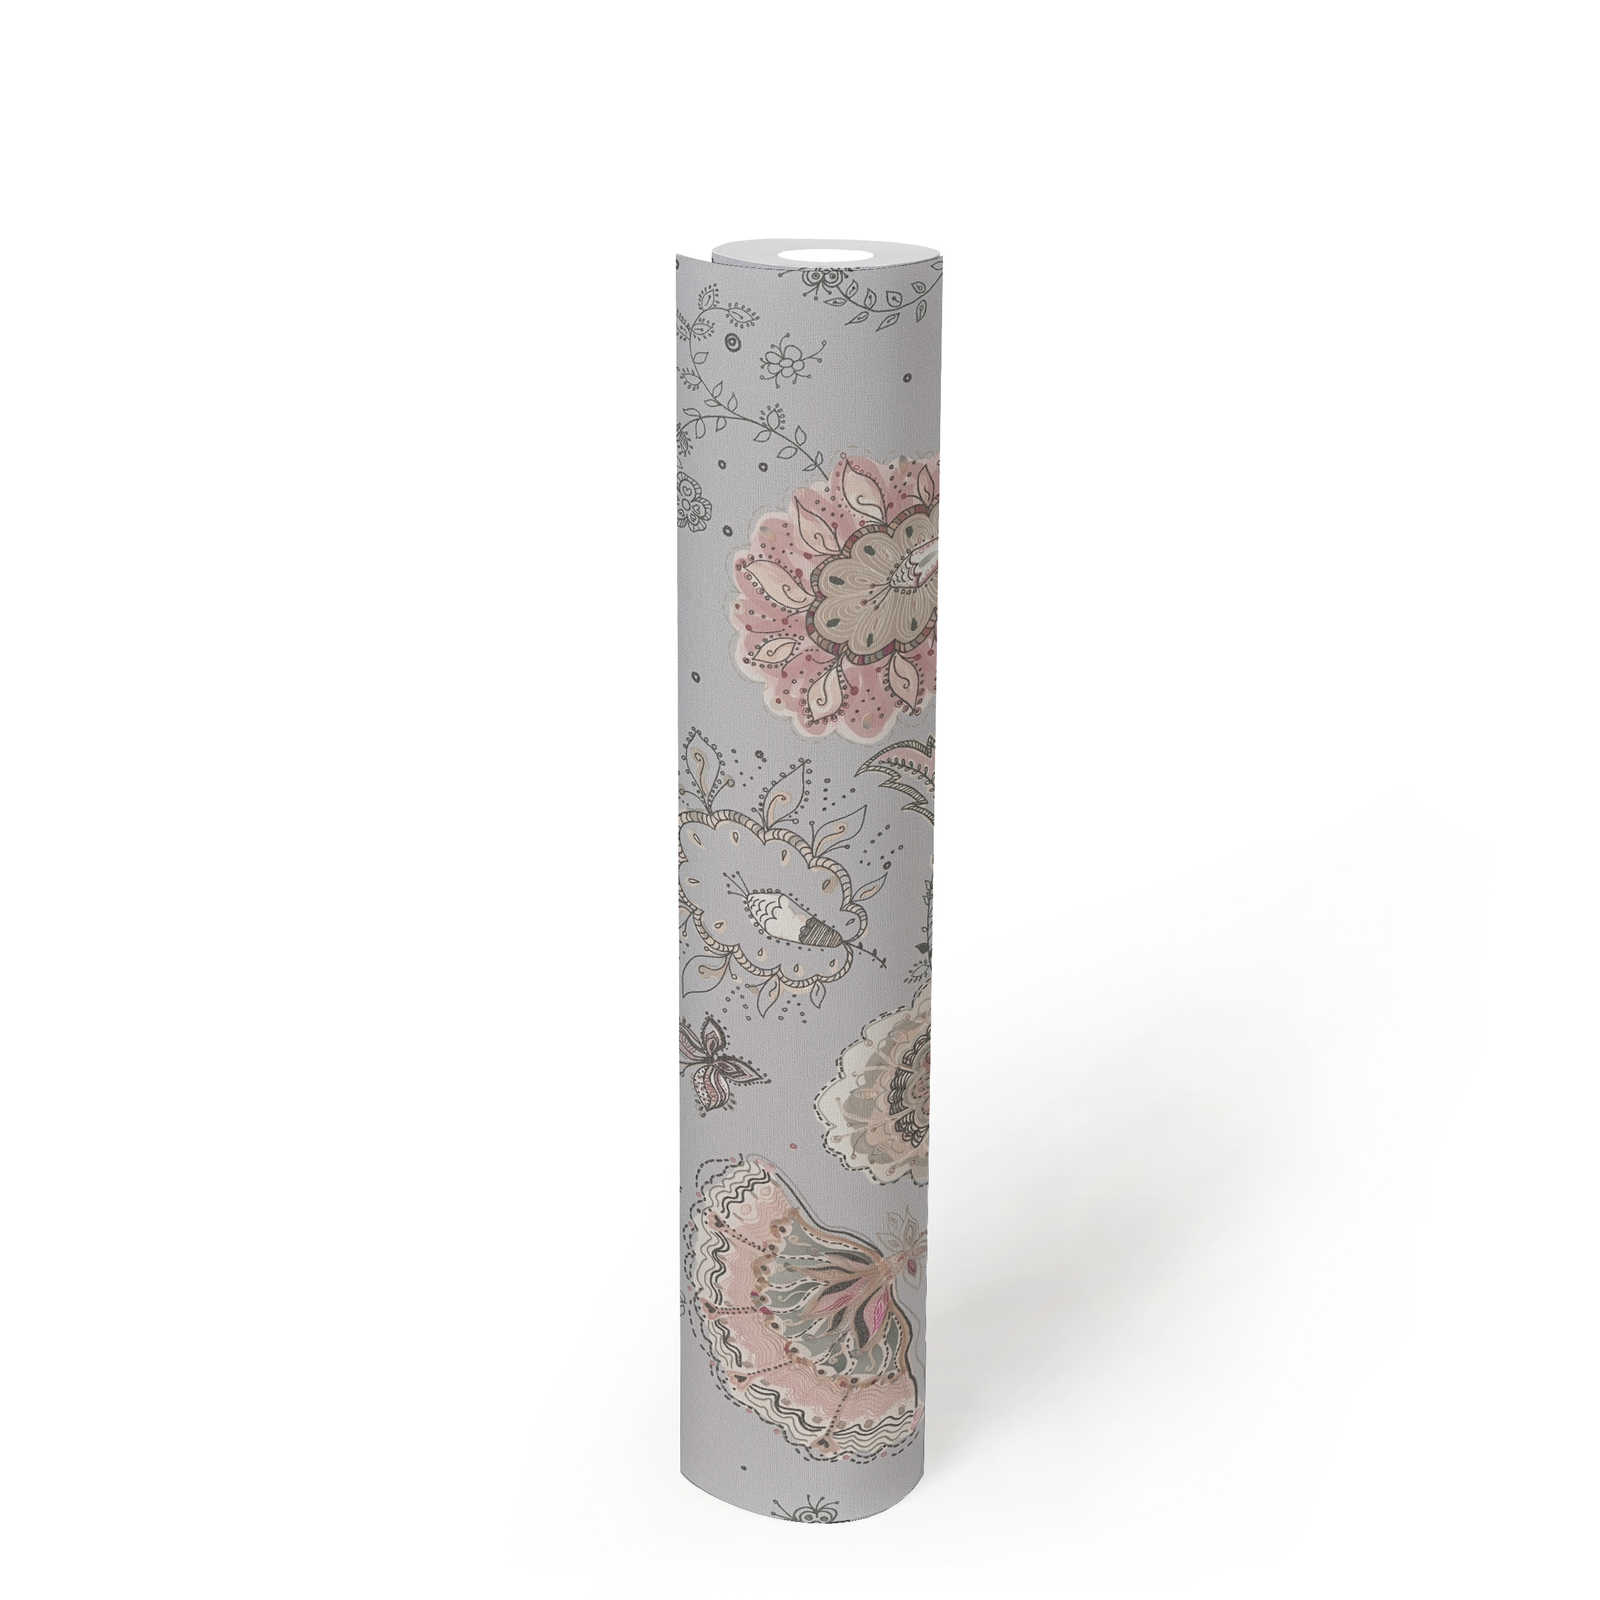             Non-woven wallpaper with abstract floral pattern fine structure - grey, beige, cream
        